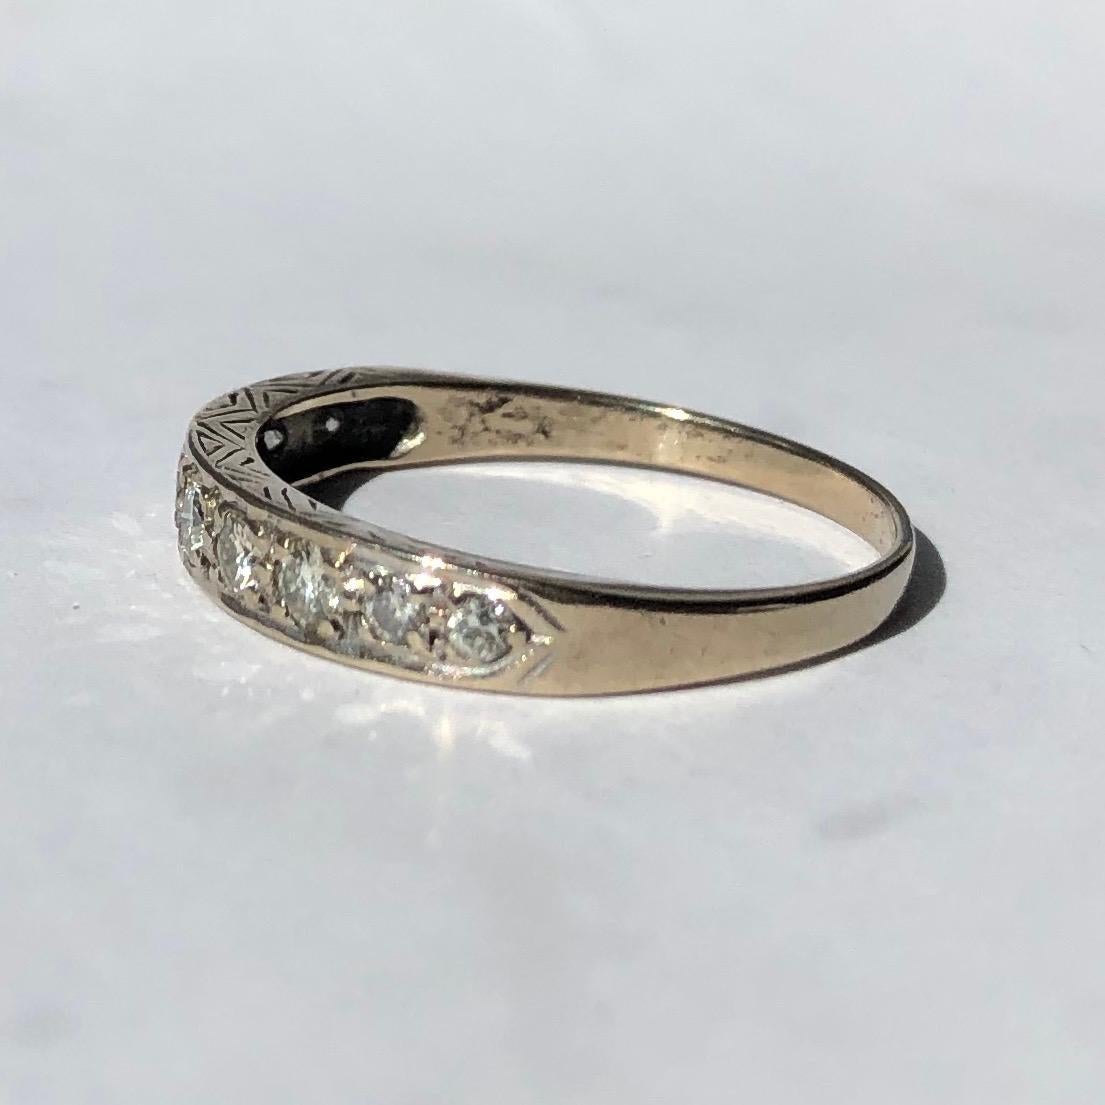 This half eternity band holds 60points worth of shimmering old European cut diamonds. The side of the band has fine engraving on it and the stones are set flush within the white gold band. 

Ring Size: S or 9 1/4 
Band Width: 3.5mm 

Weight: 2.93g
